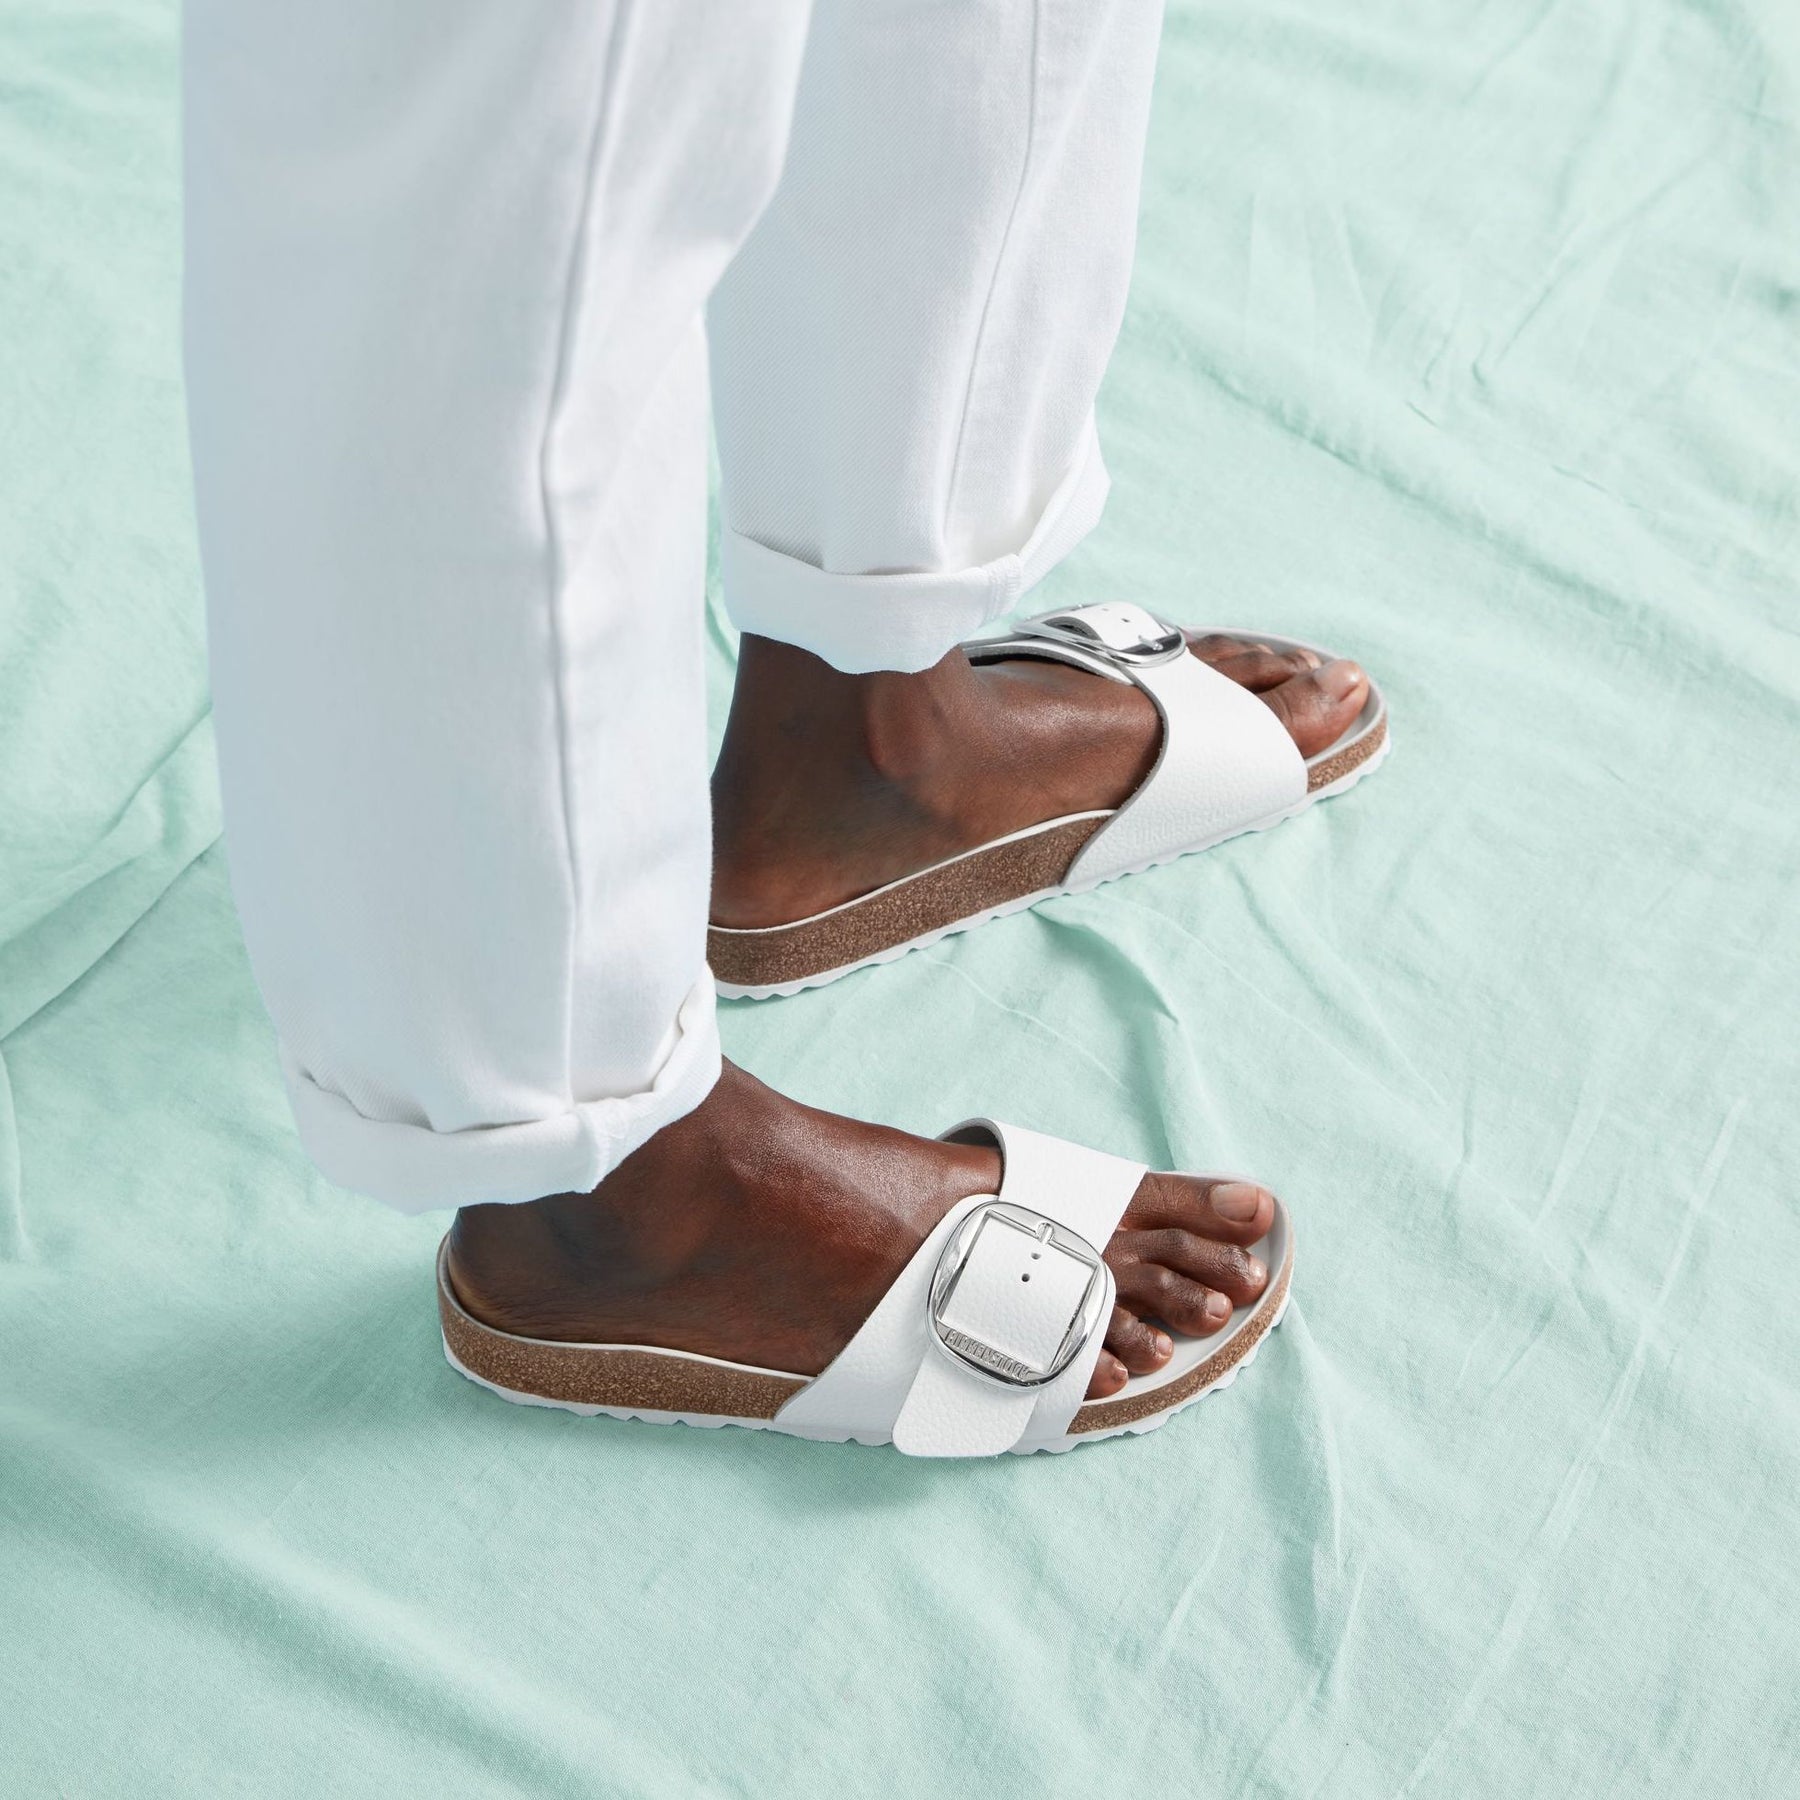 Birkenstock Limited Edition Madrid Big Buckle white leather